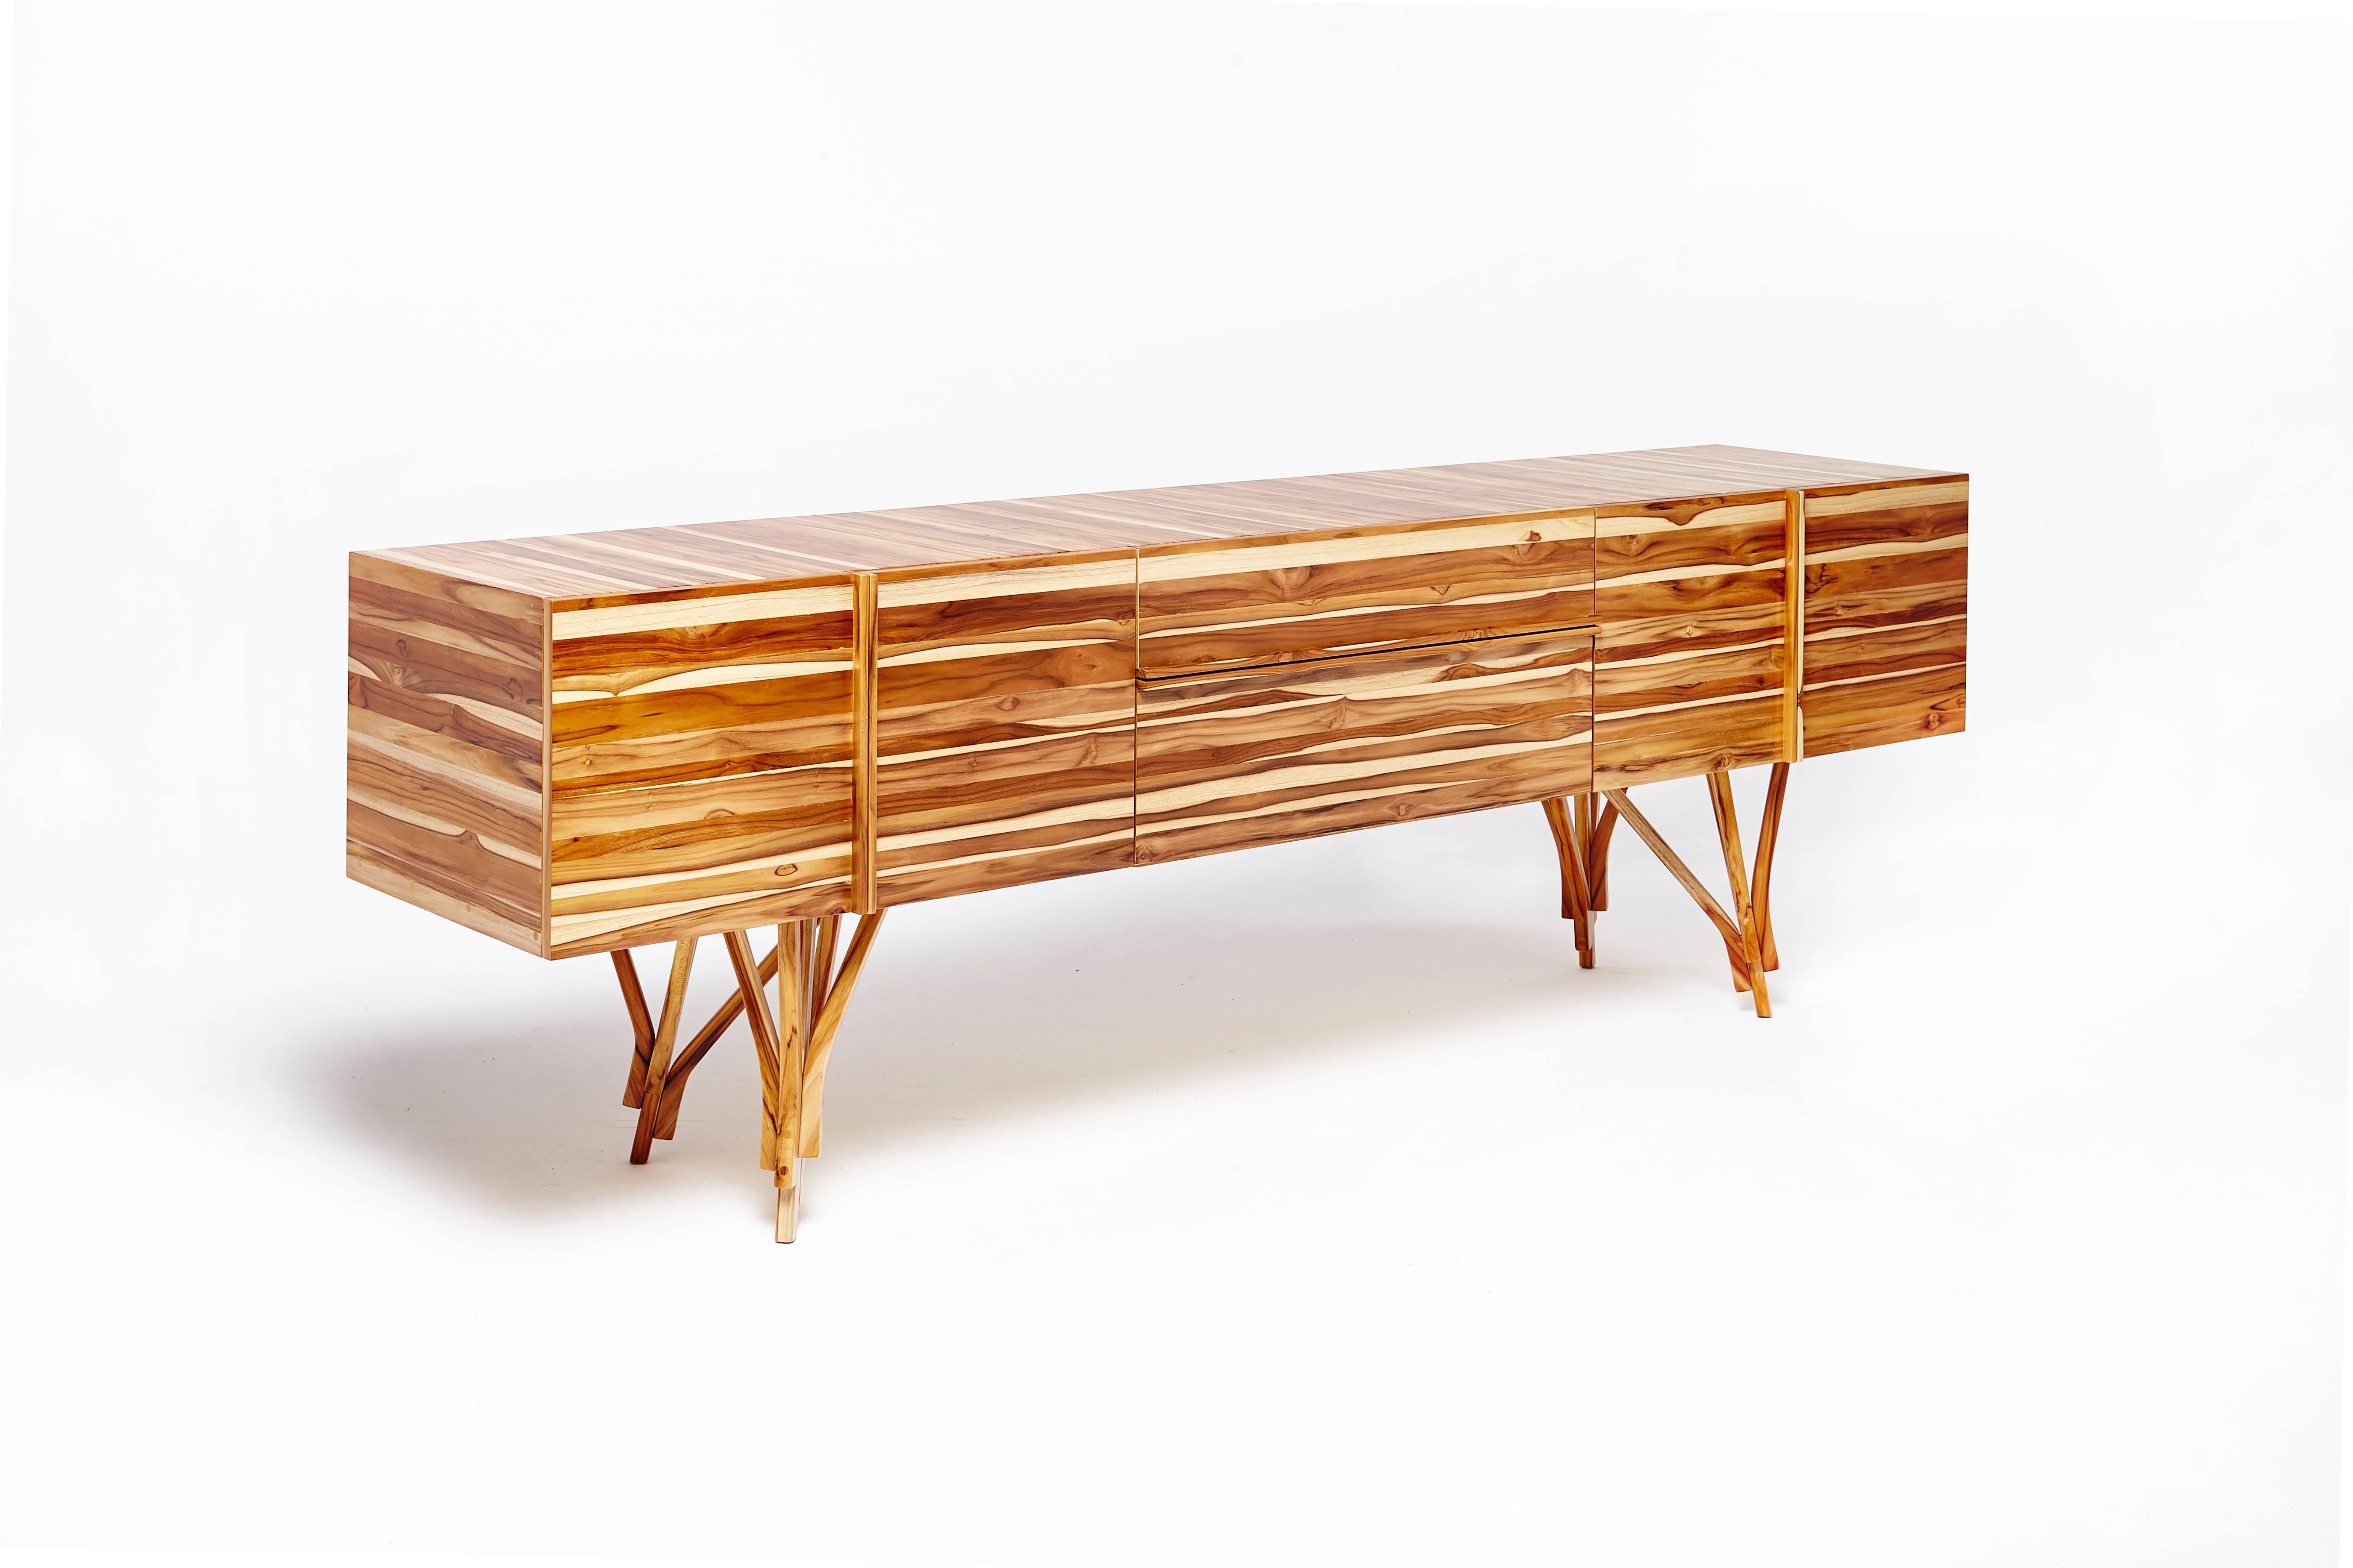 Guaimbê Credenza by Paulo Alves

Body in teak solid wood panel and legs in solid teak. Interior and back in jequitibá wood veneer.

(Six doors and two drawers ) back in same wood veneer 

Dimensions: 240 x 50 x 75 cm. Weight 250 kg.